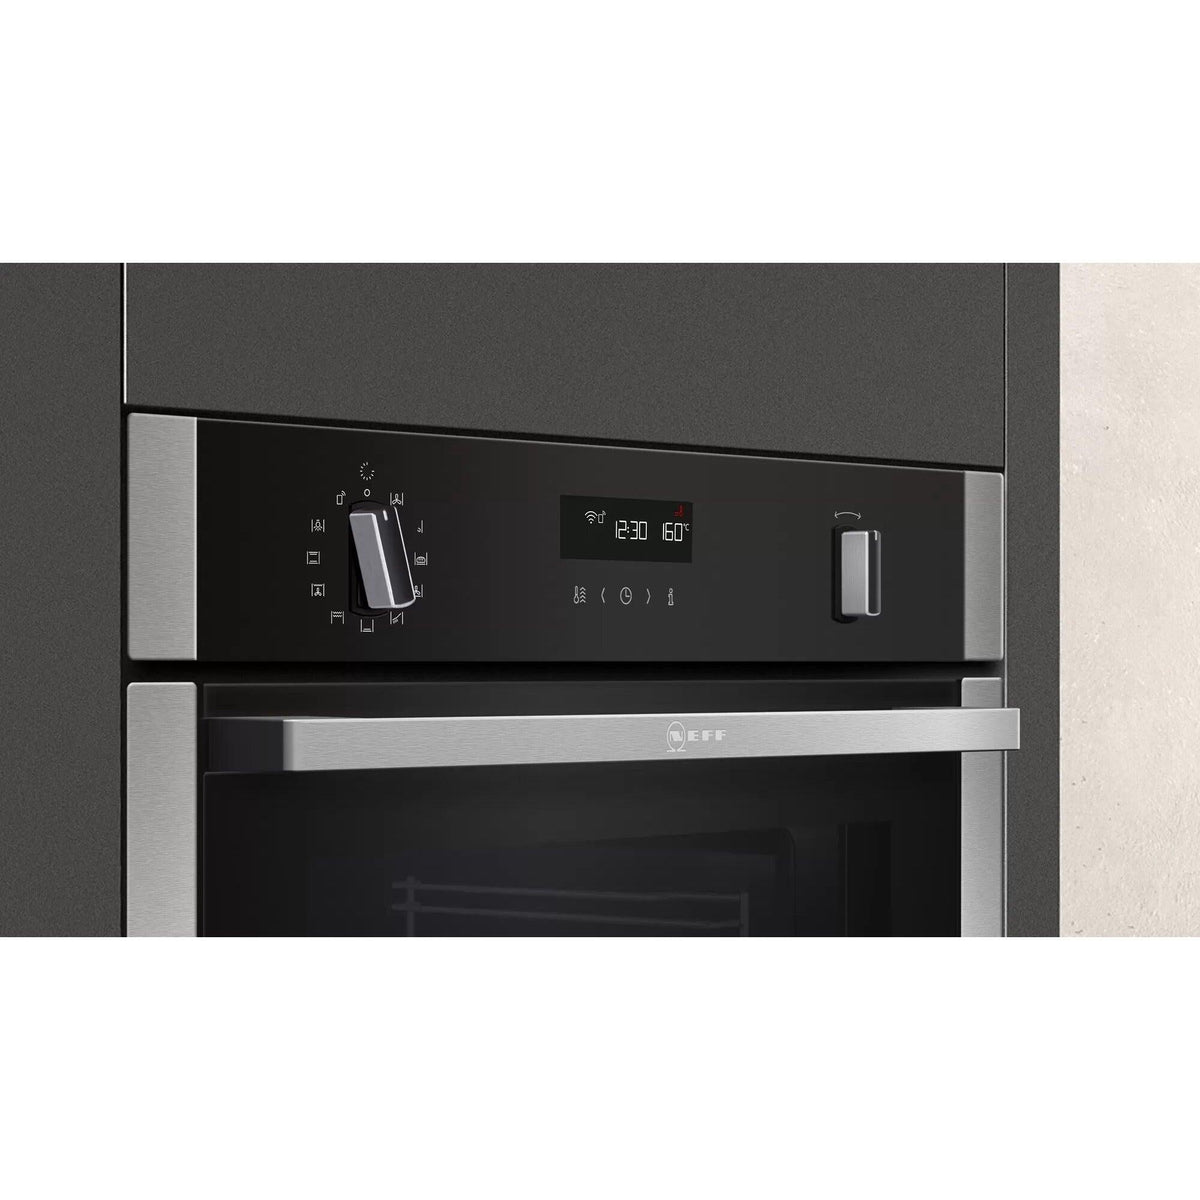 Neff N 50 71L Built-In Electric Single Oven - Stainless Steel | B6ACH7HH0B from DID Electrical - guaranteed Irish, guaranteed quality service. (6977496154300)